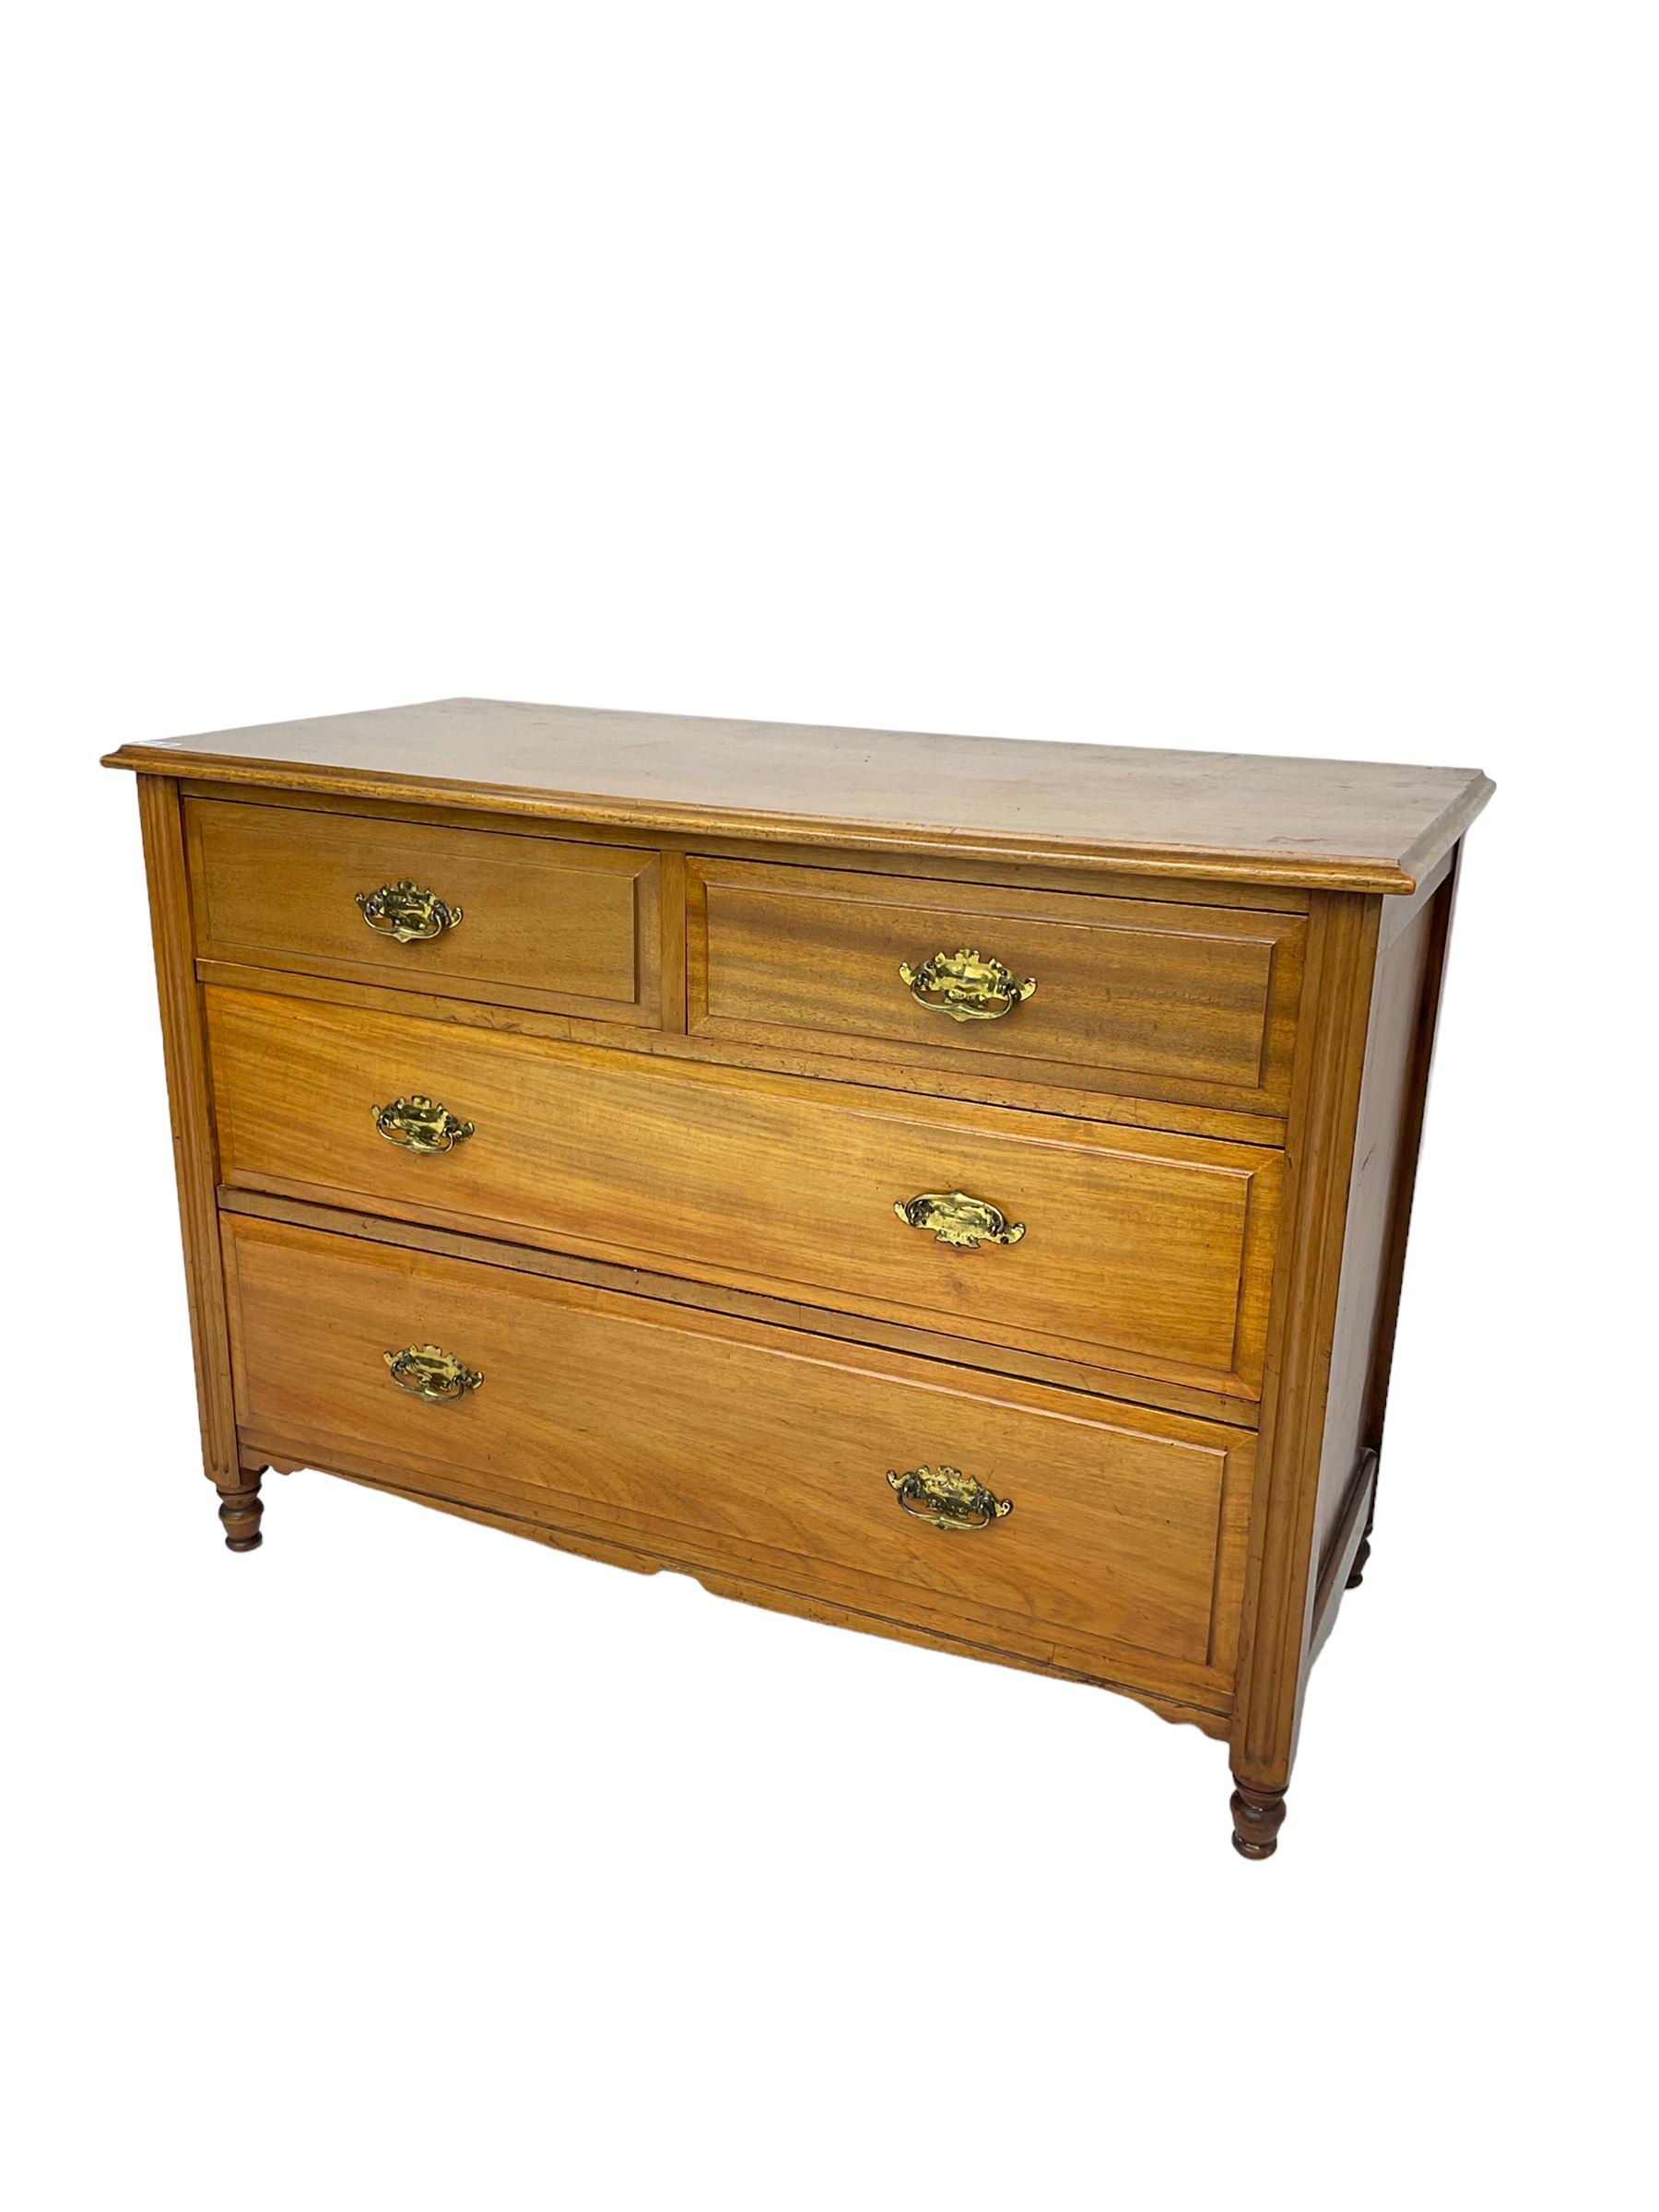 Late 19th century walnut chest - Image 5 of 5